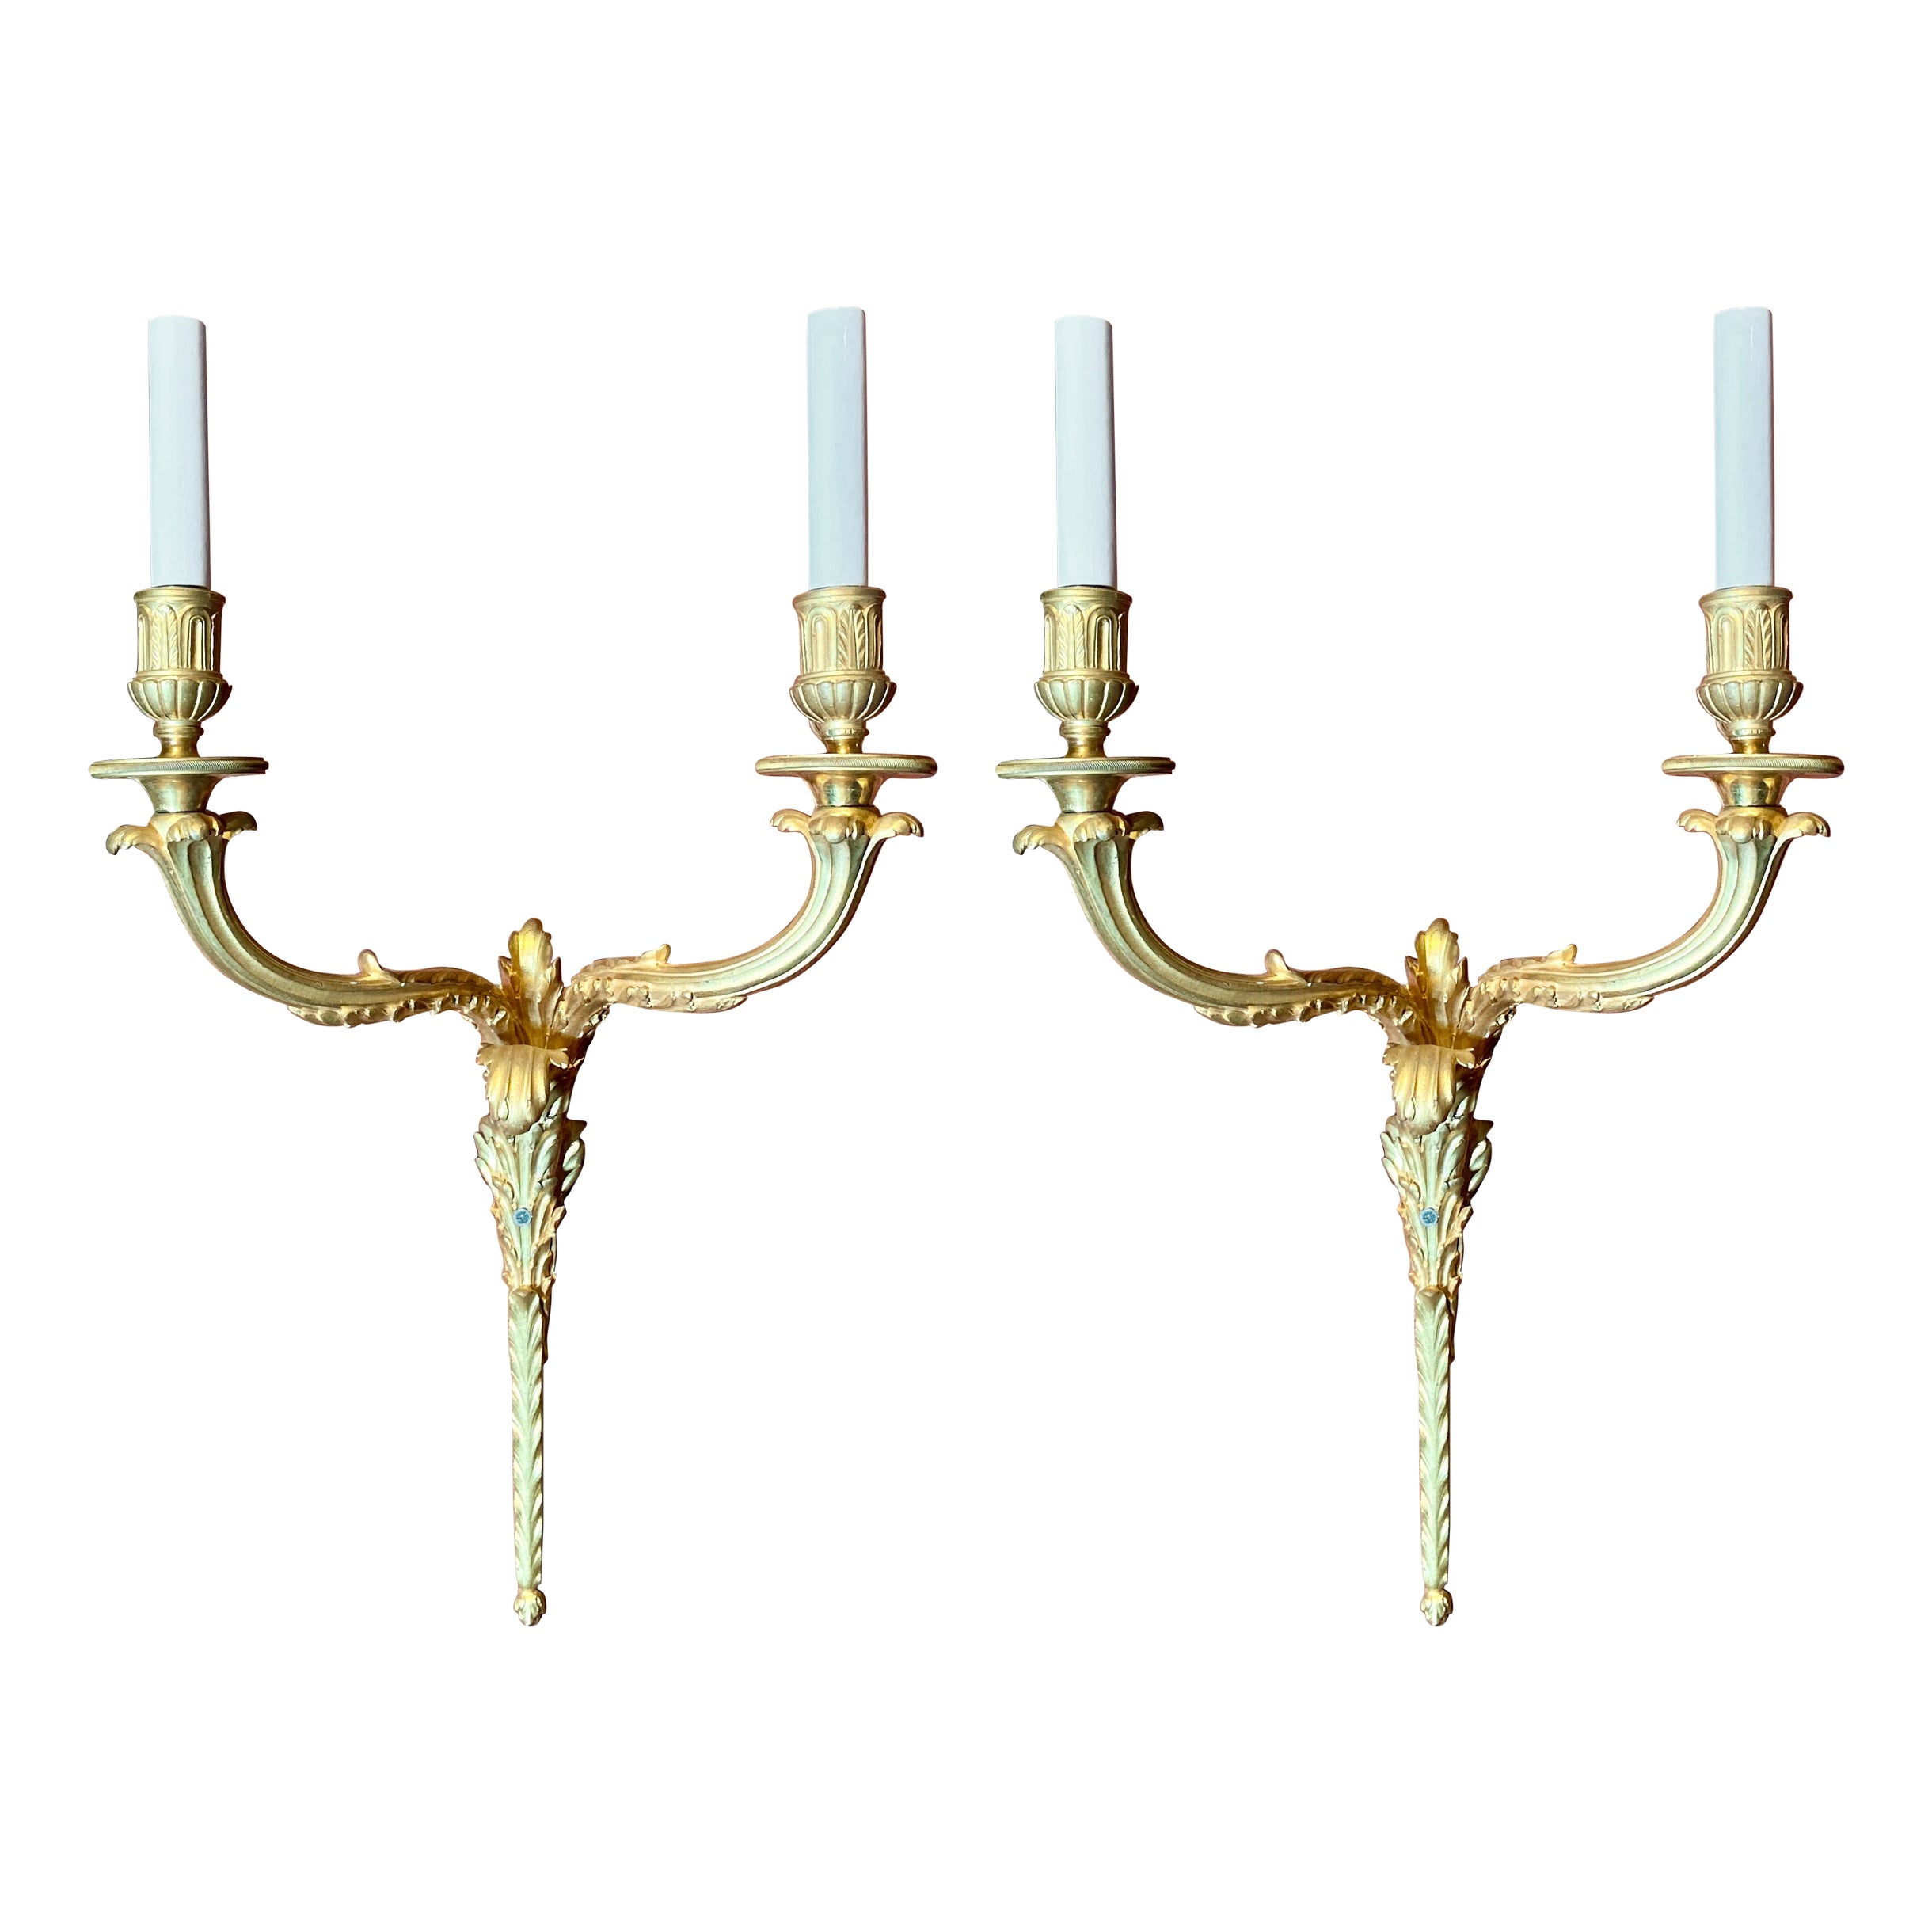 Pair Antique French Bronze D' Ore Wall Sconces, Circa 1880s